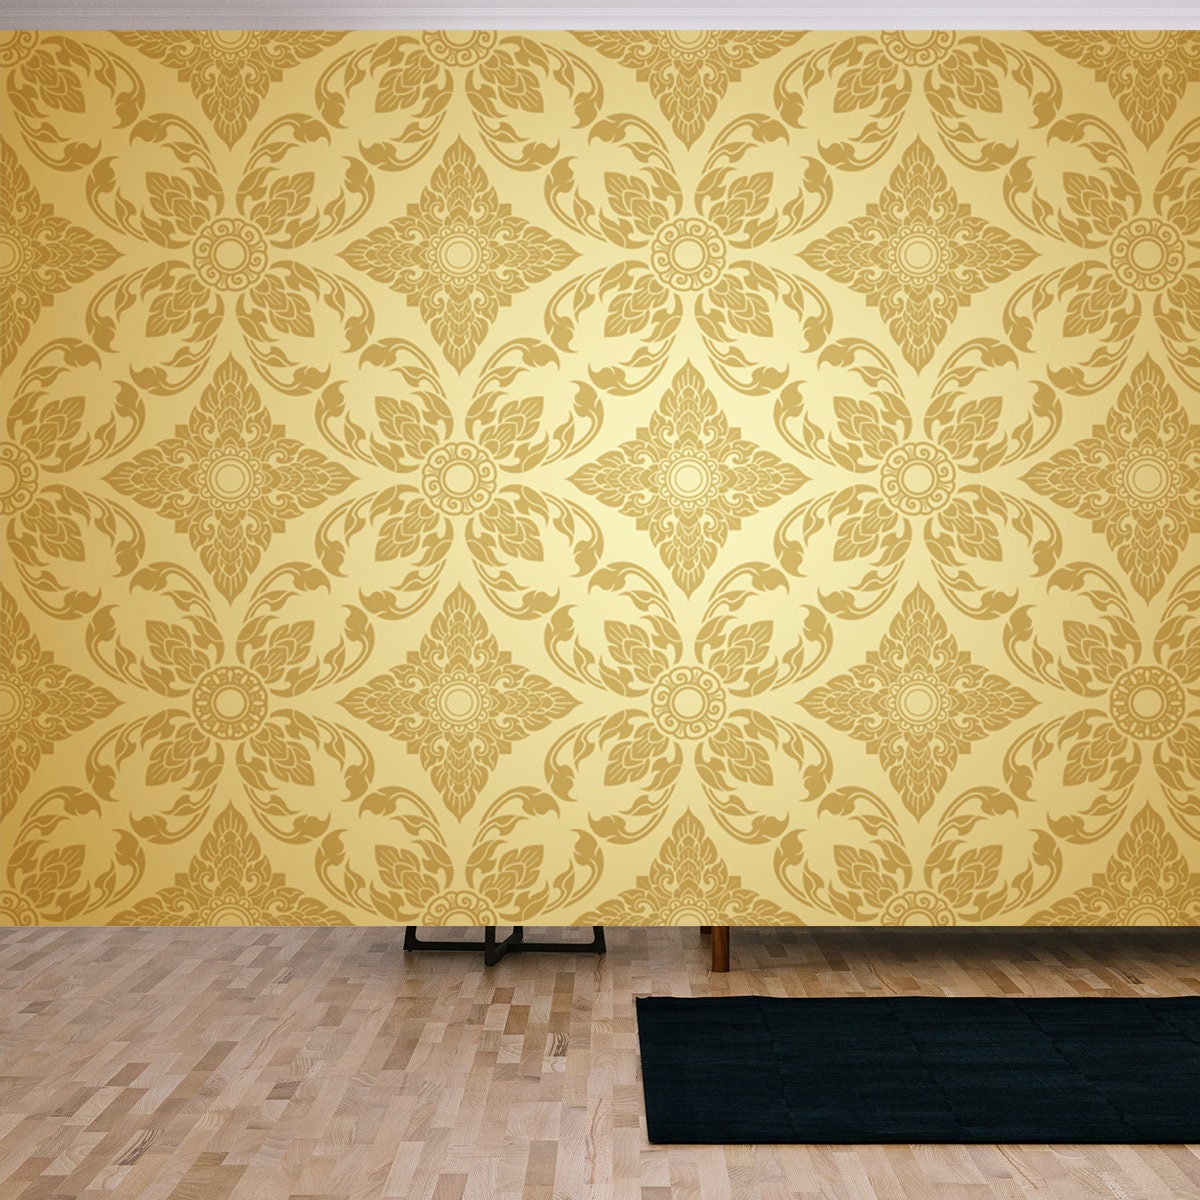 Thai Art and Asian Style Luxury Banner Gold Background Wallpaper Living Room Mural